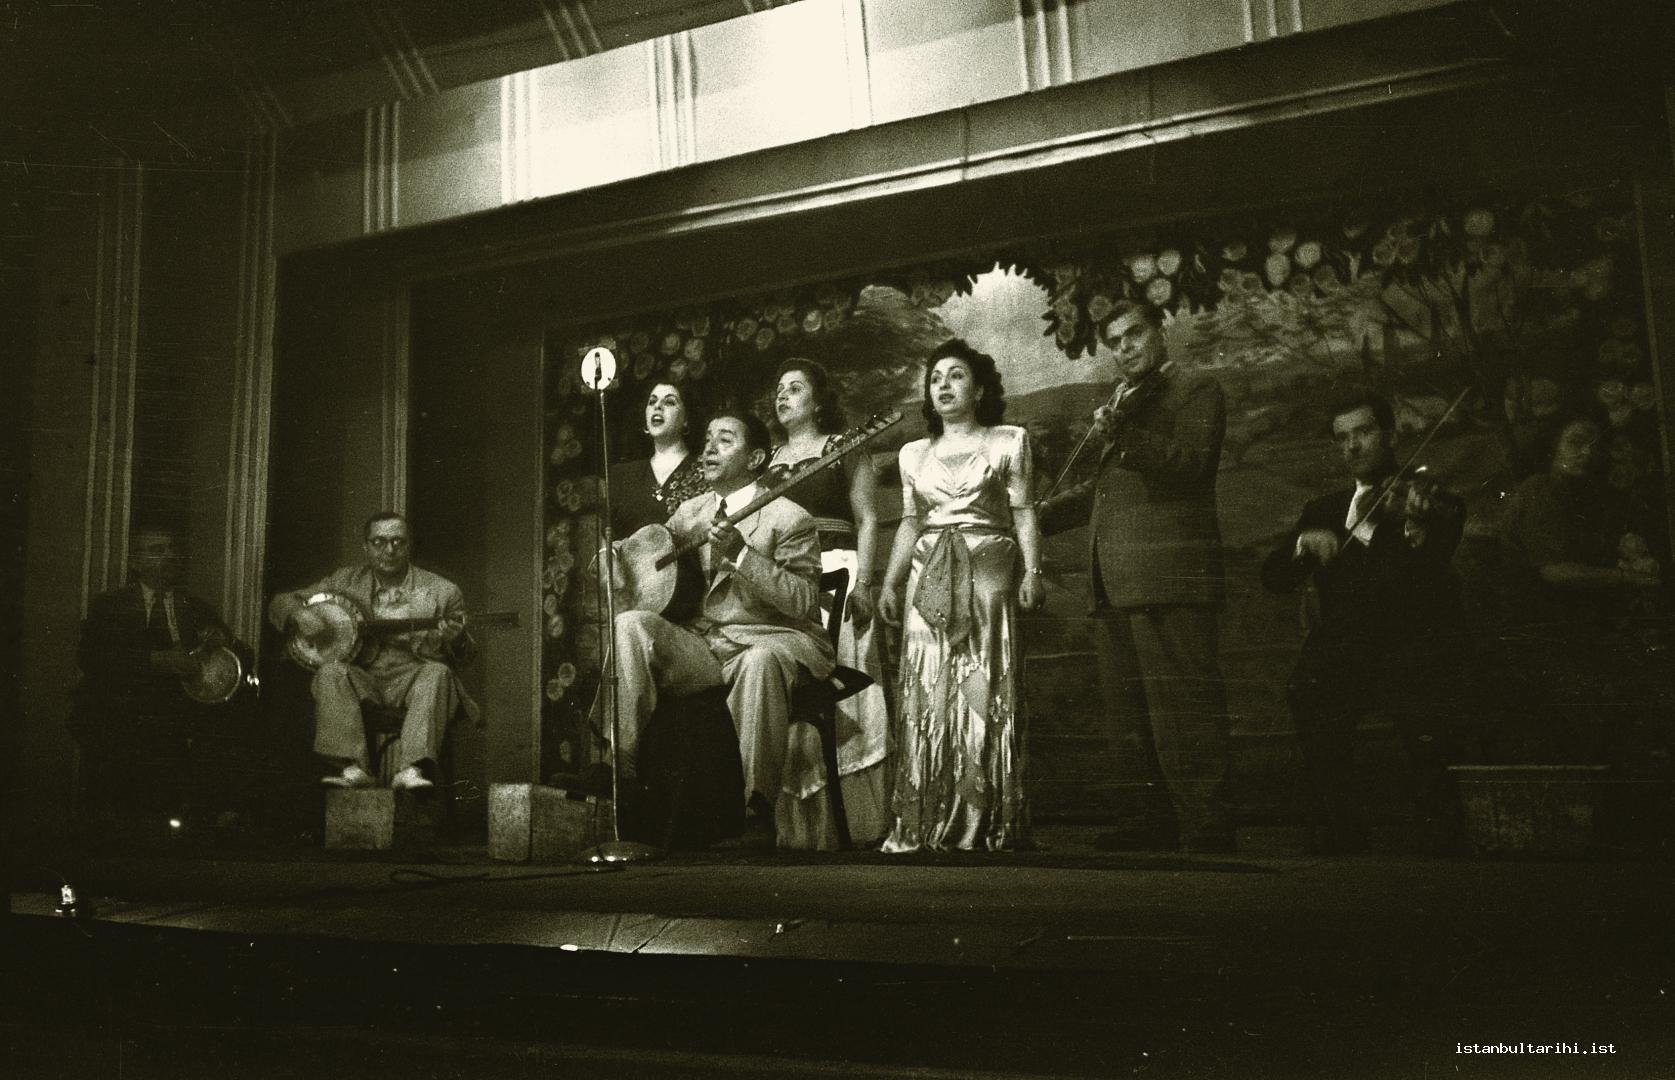 10- Scenes from the life of music in 1940s. Tanbur player and composer Selahattin Pınar and Sa ye Ayla are singing on the stage. There are famous players such as Yorgo  Bacanos among the group of instrument players.